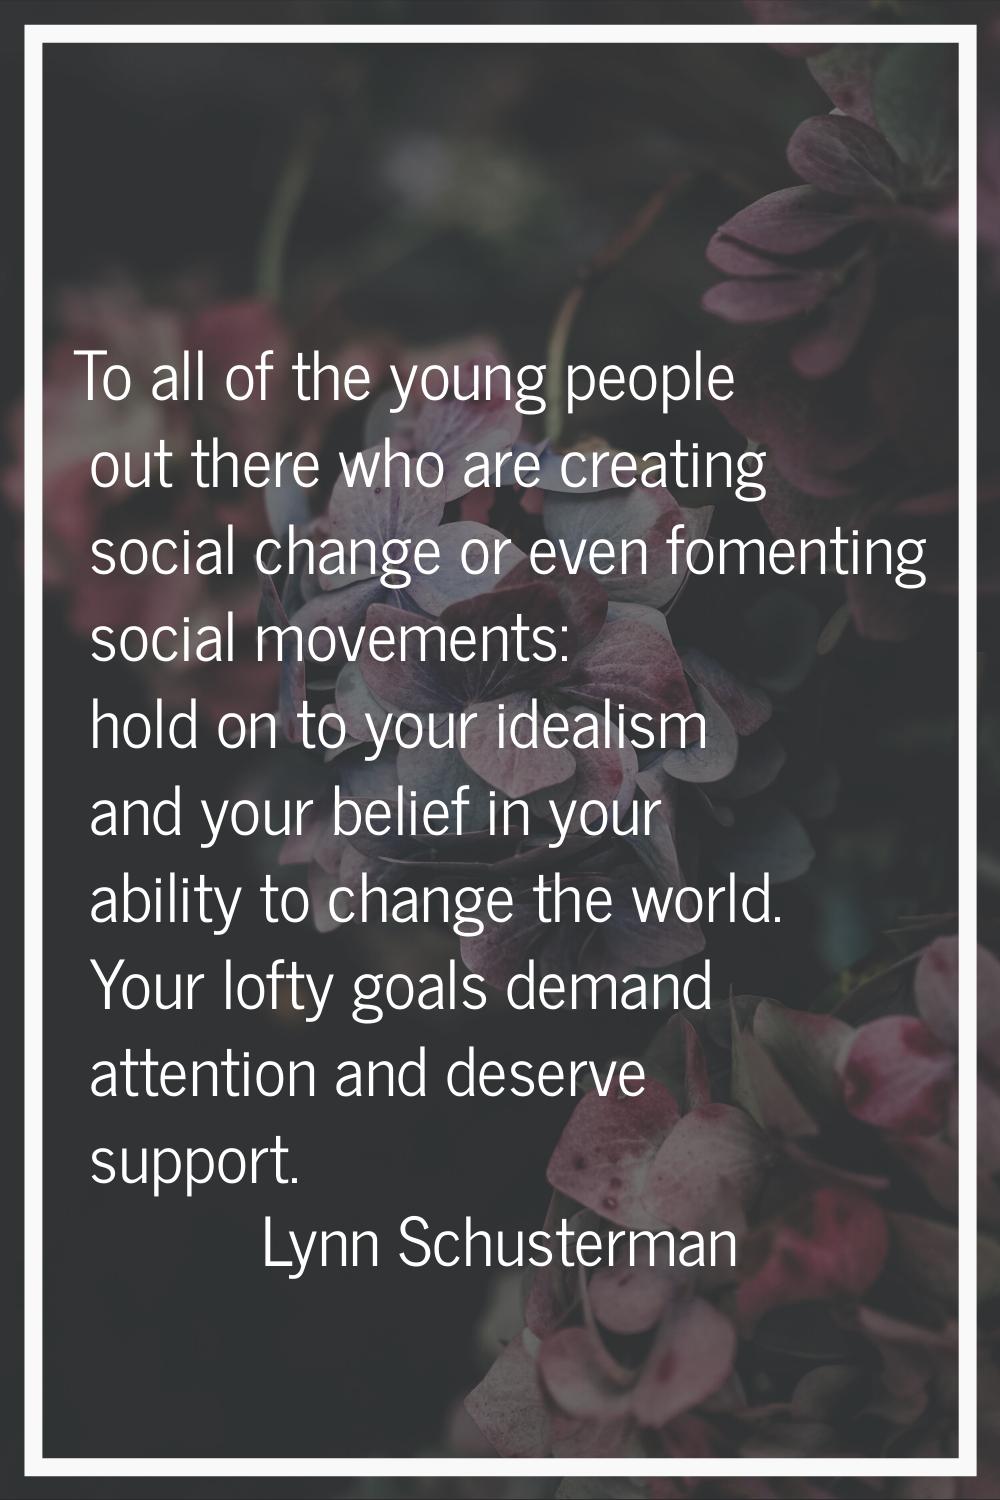 To all of the young people out there who are creating social change or even fomenting social moveme